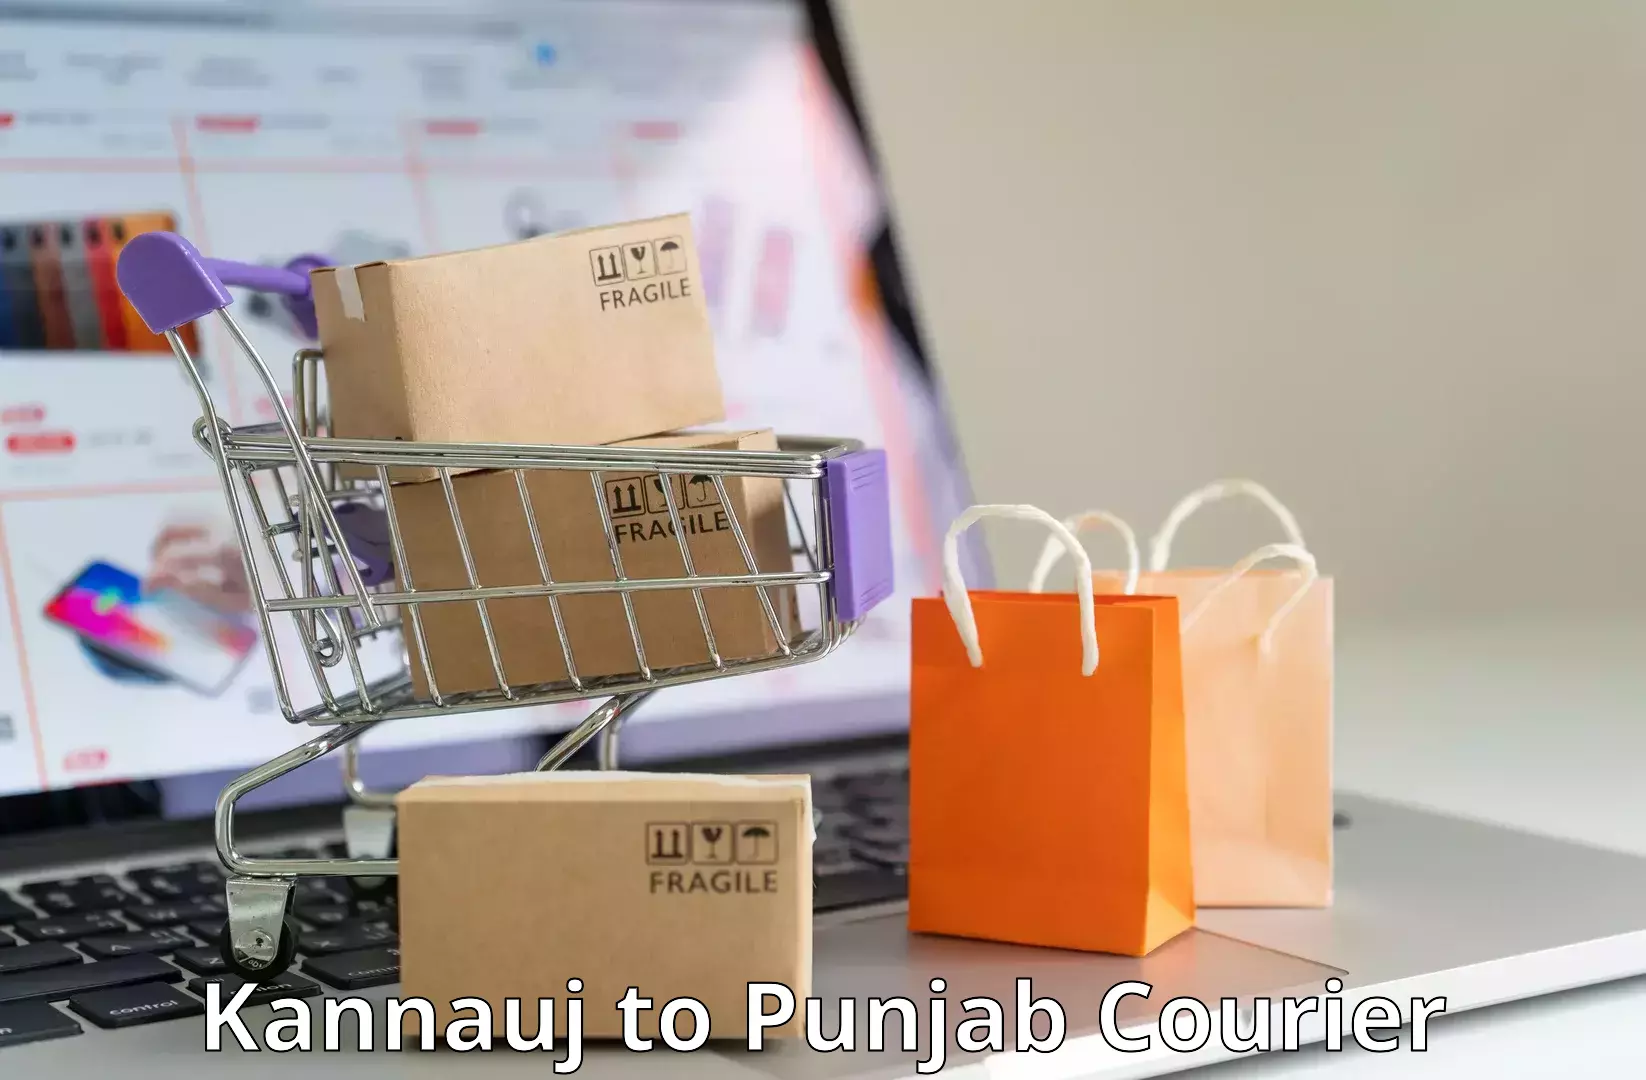 Courier tracking online Kannauj to Amritsar